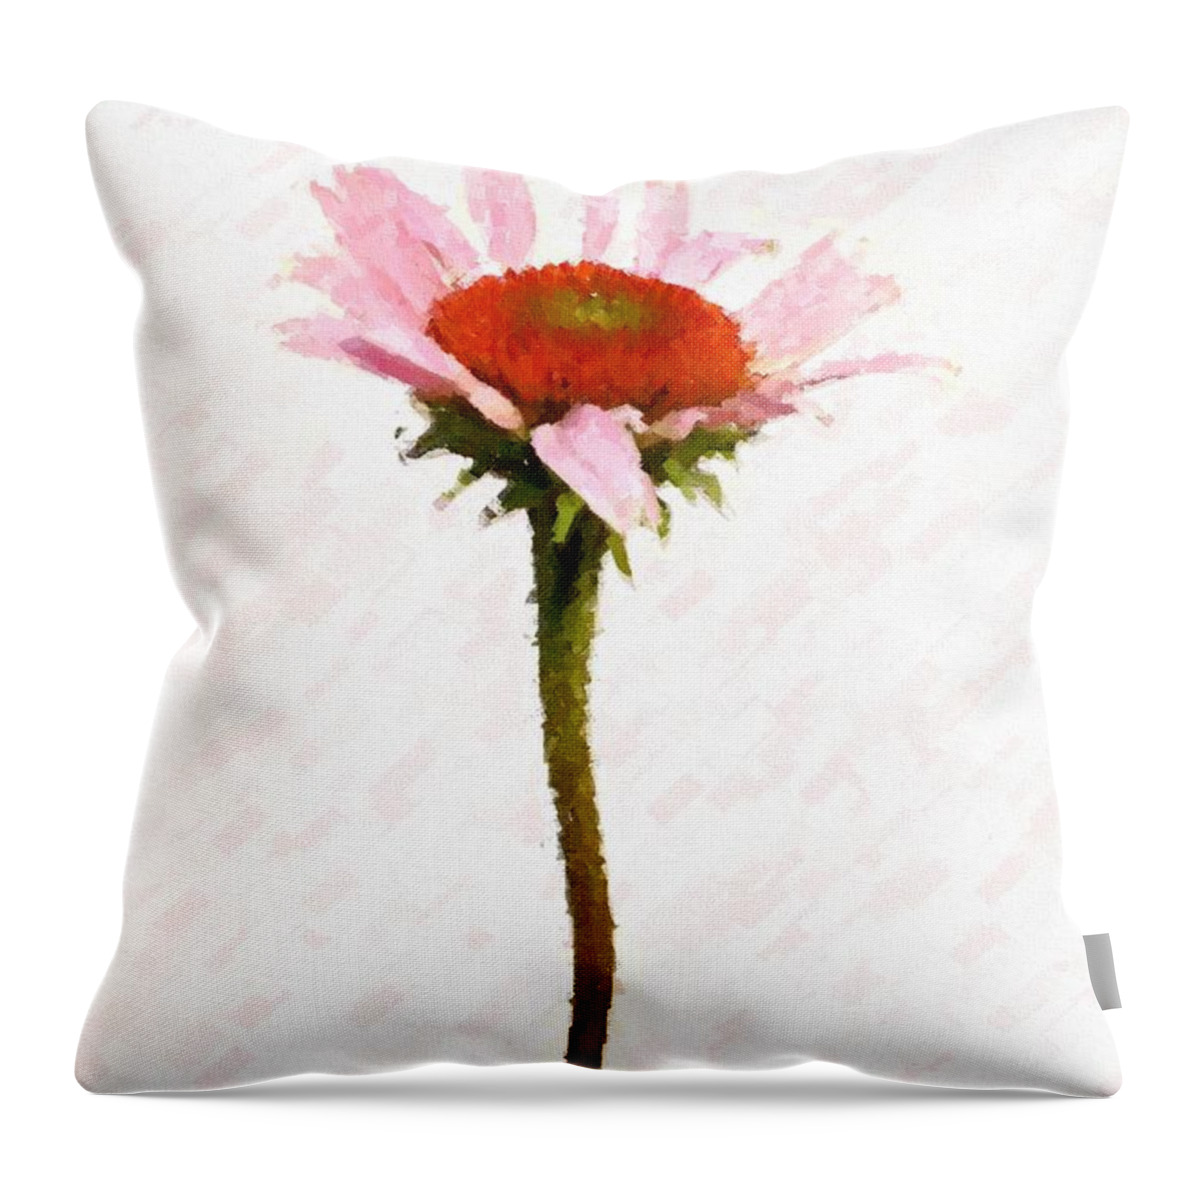 Caulk Throw Pillow featuring the photograph He Loves Me He Loves Me Not by Angie Tirado